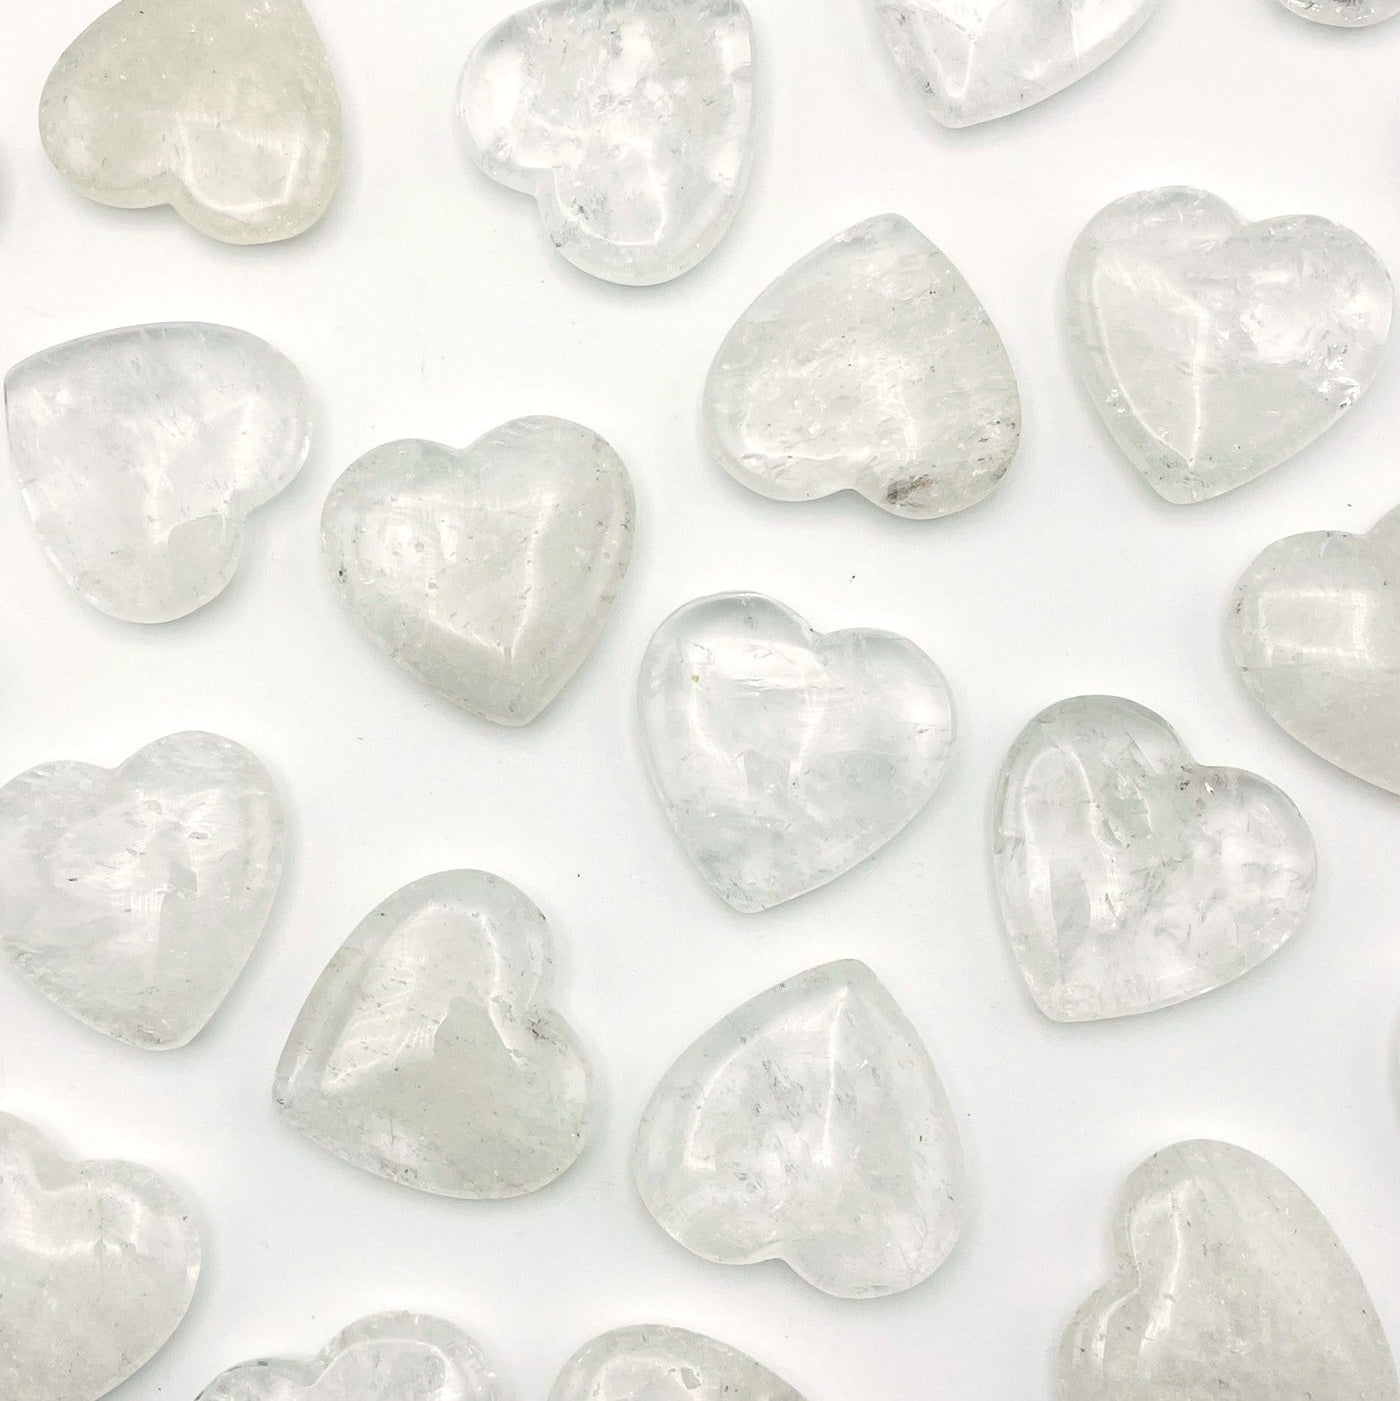 multiple crystal quartz heart shaped stones displayed to show the differences in the color shades 